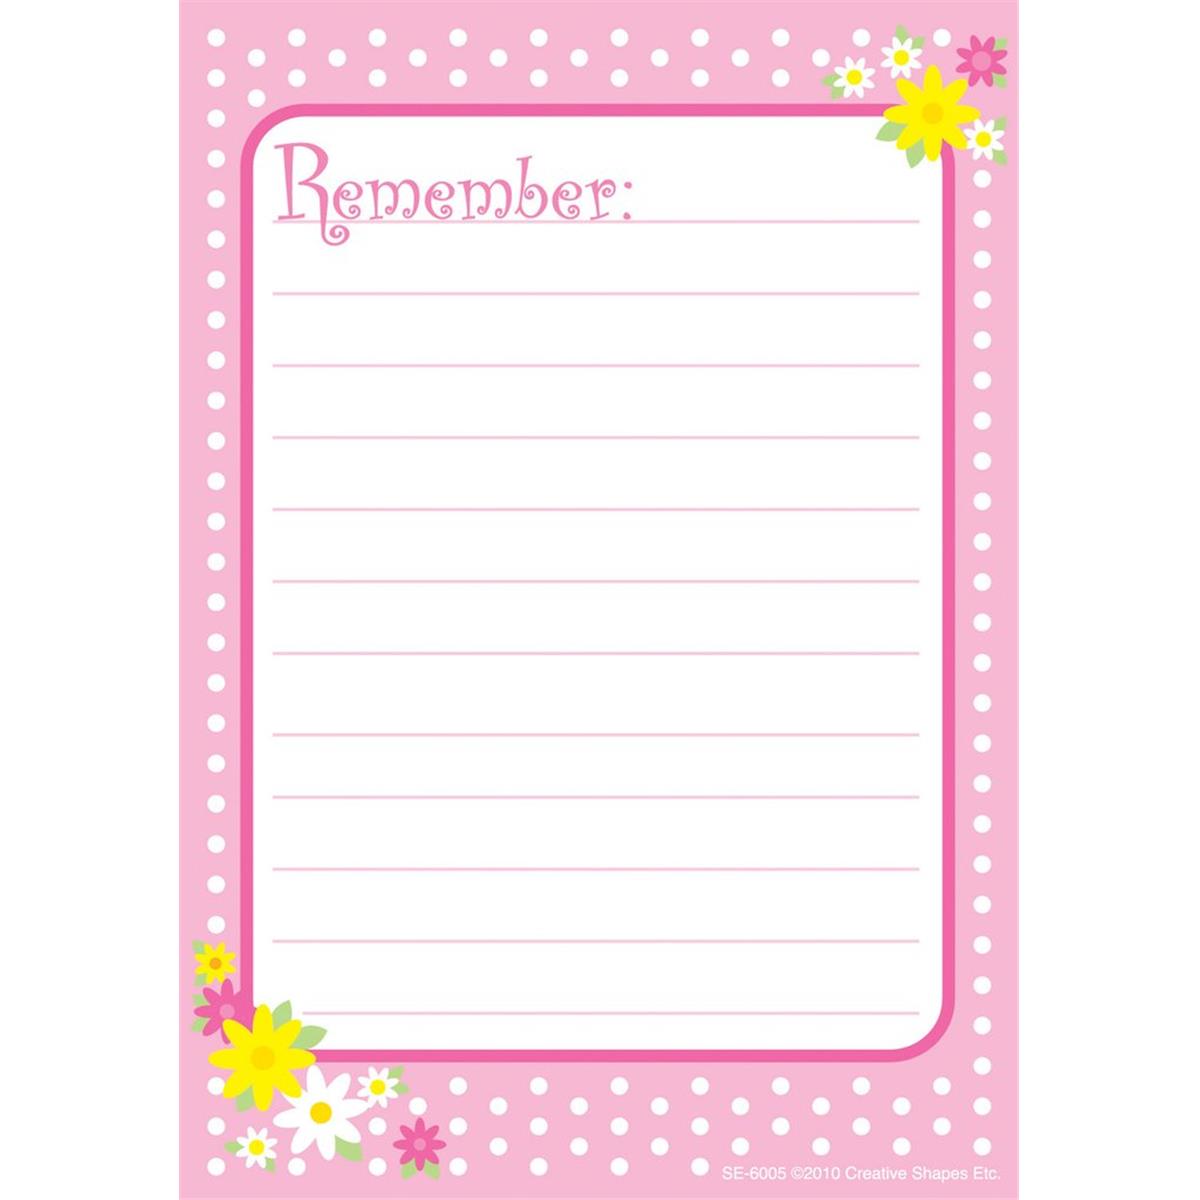 Se-6005 3.5 X 5 In. Notes & Quotes, Remember Pink Polka Dots - 35 Sheets Per Pack